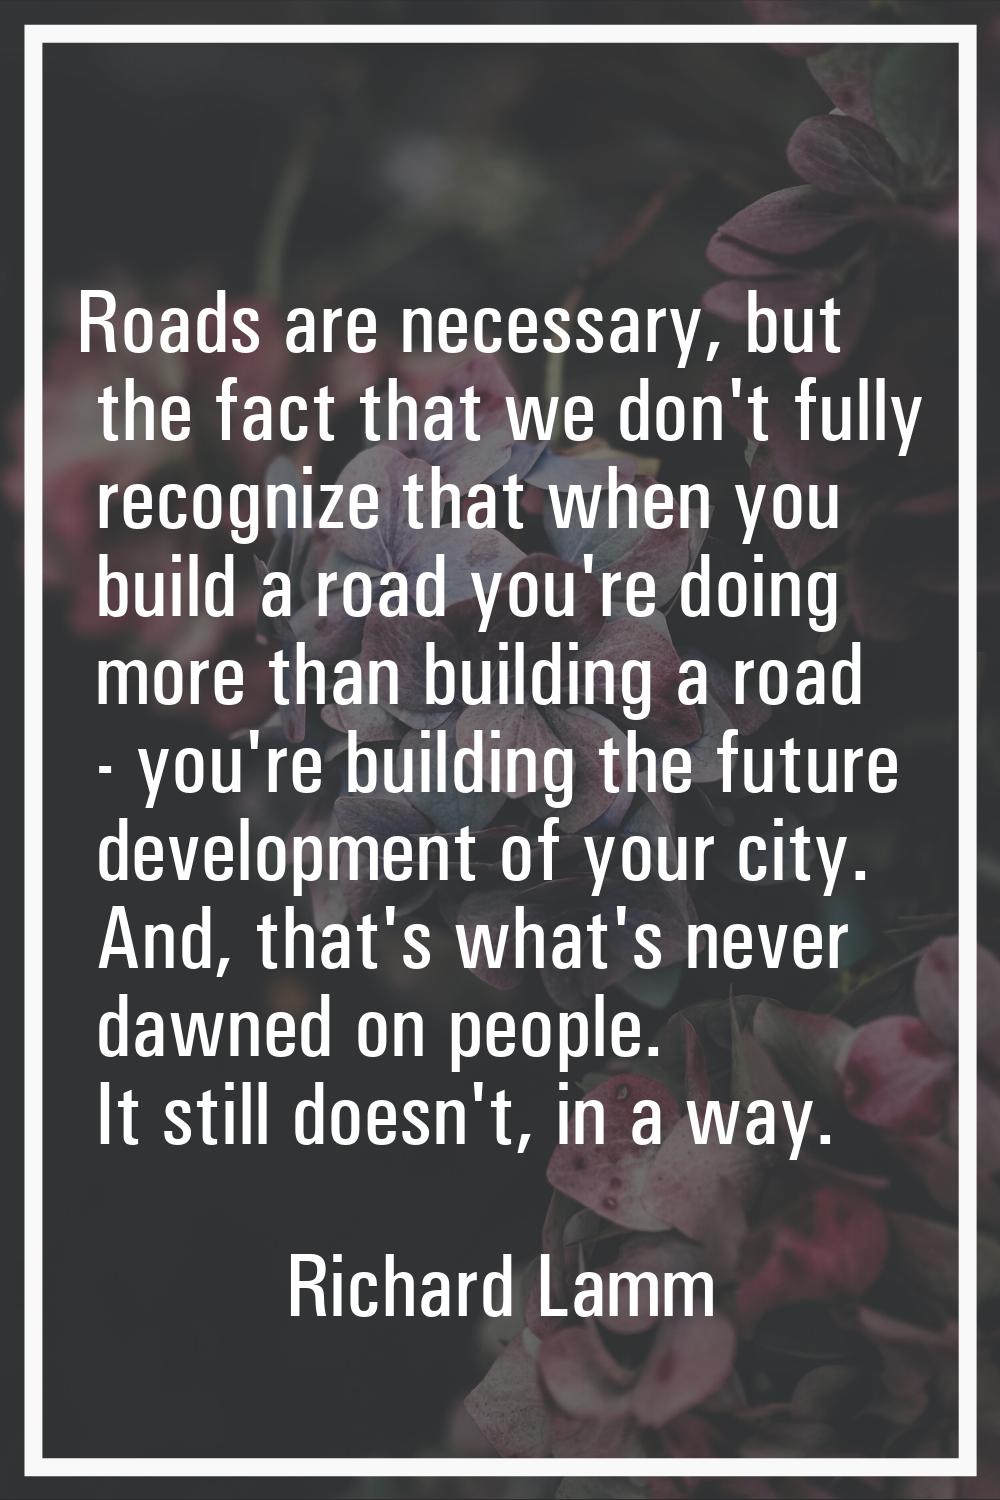 Roads are necessary, but the fact that we don't fully recognize that when you build a road you're d